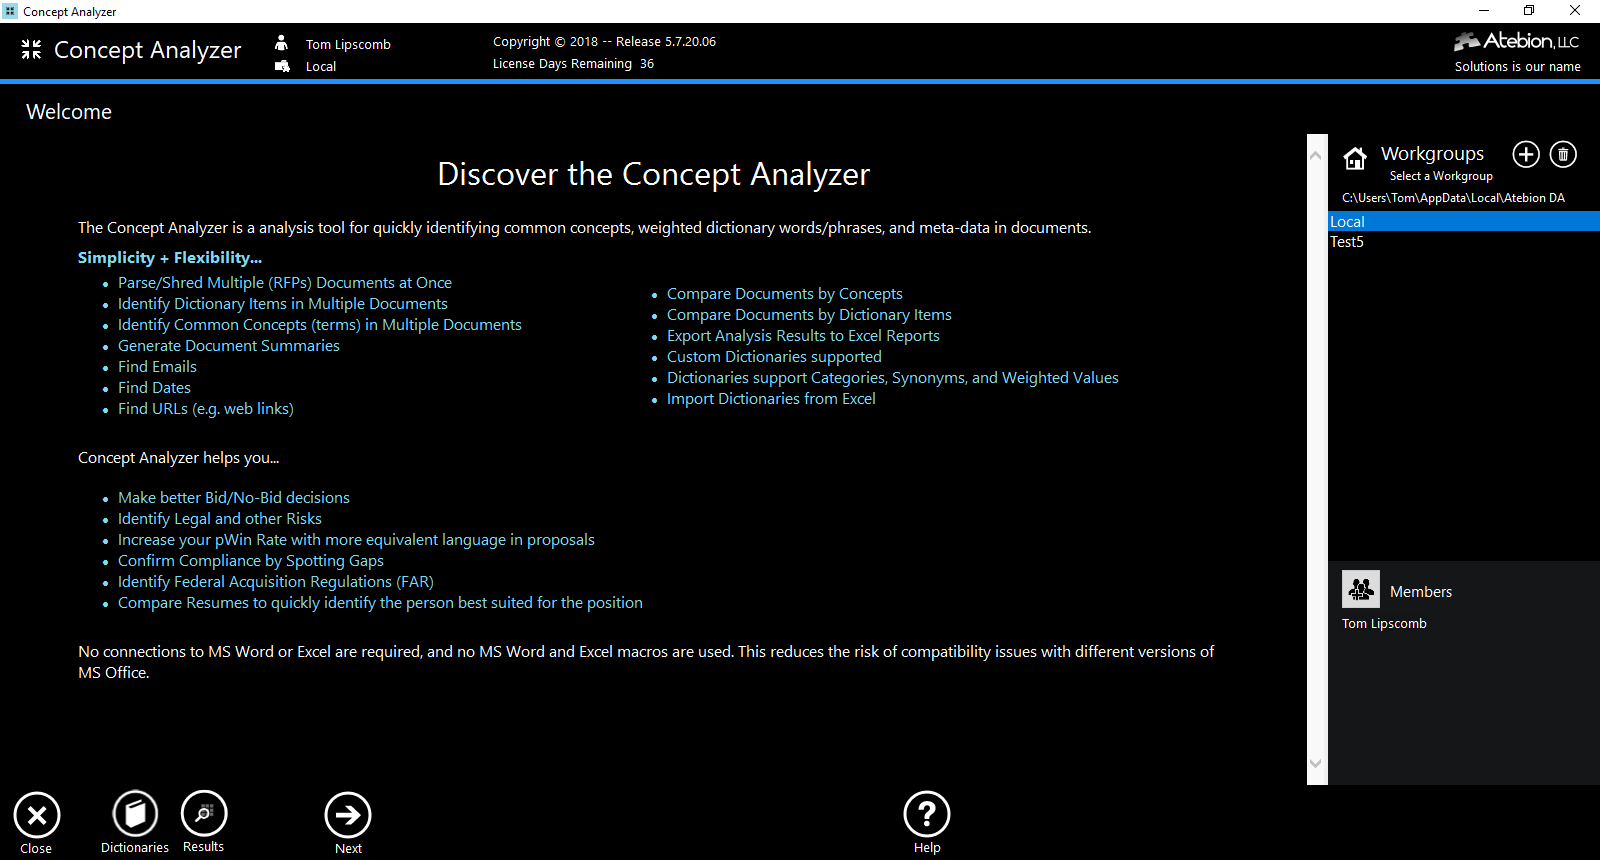 Screen image of the Concept Analyzer's Welcome panel and Workgroups subpanel